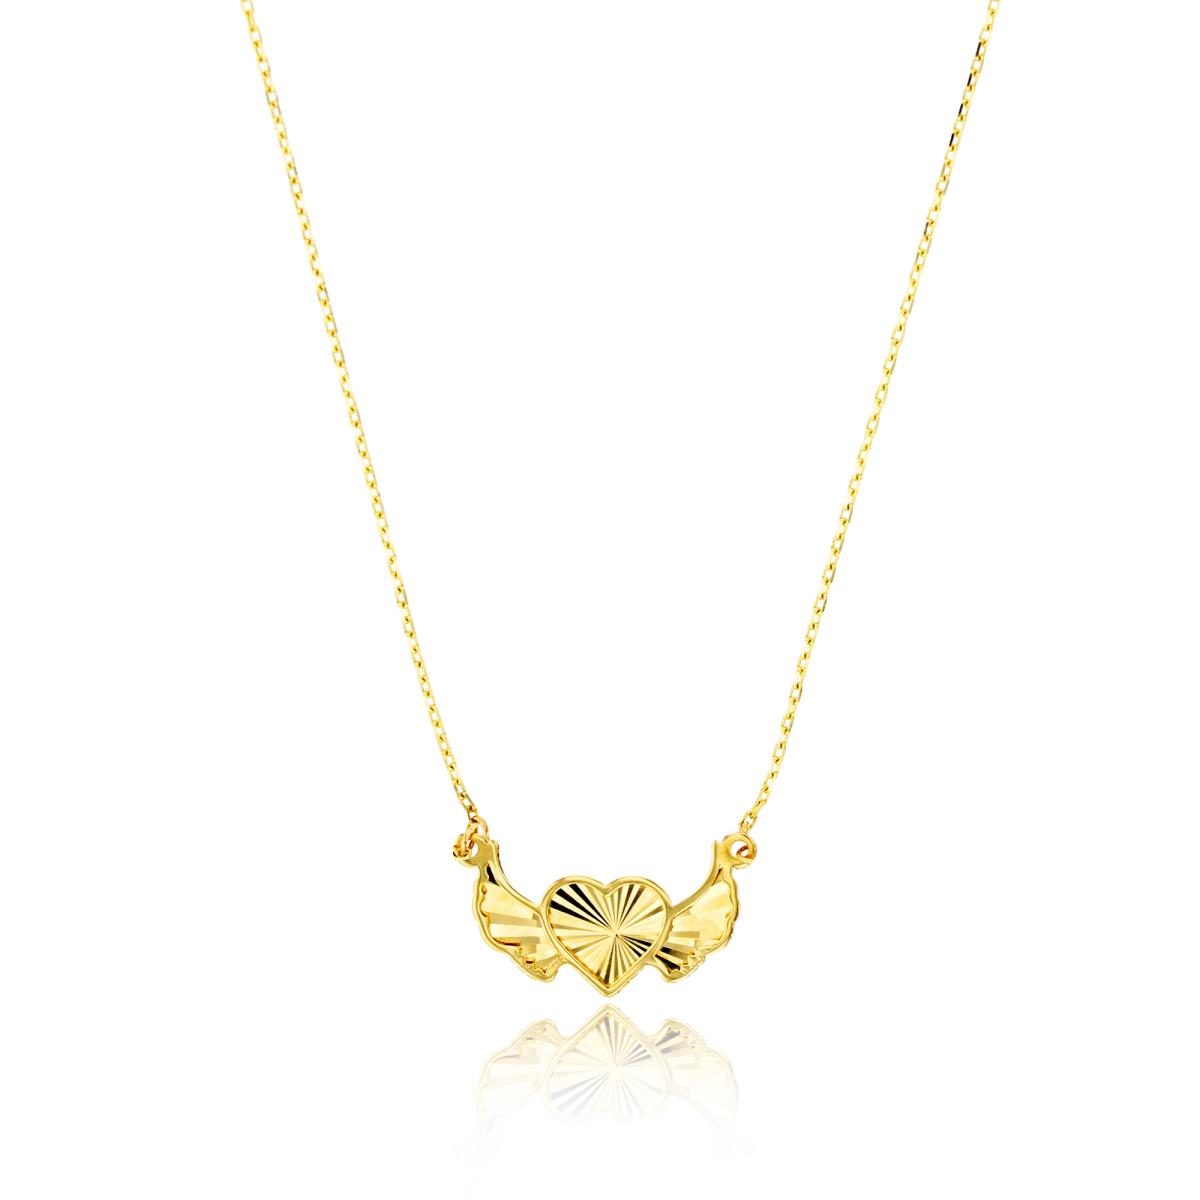 10K Yellow Gold DC Heart with Wings 16"+1"Necklace